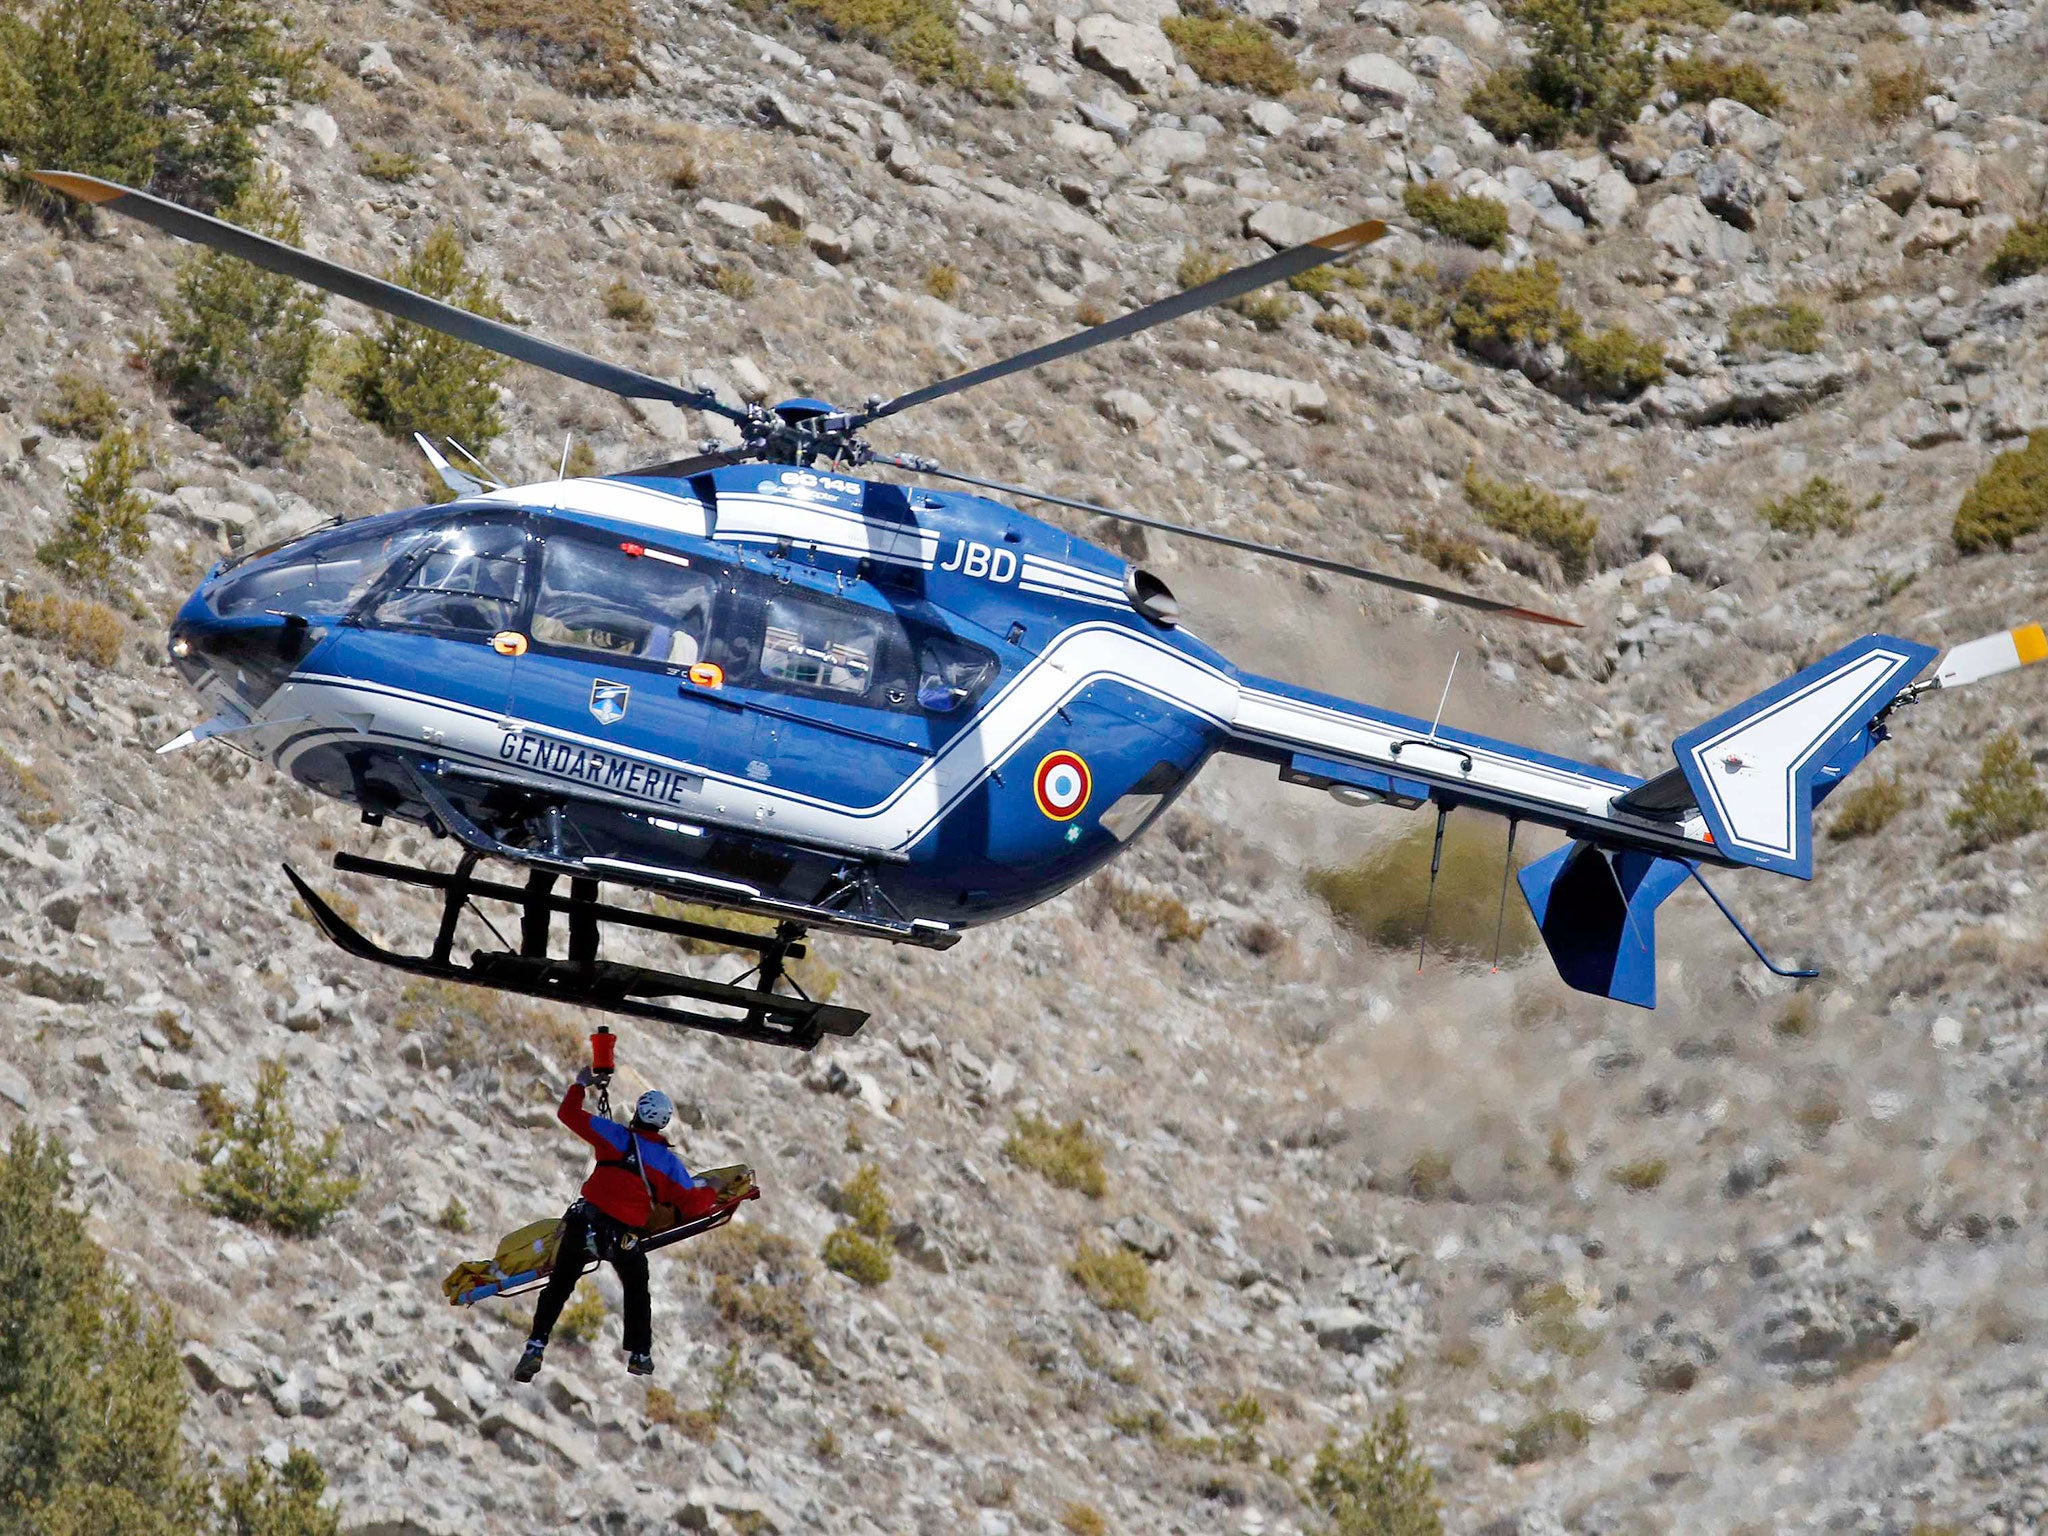 A body of a victim is evacuated by a French Gendarmerie rescue helicopter from the crash site